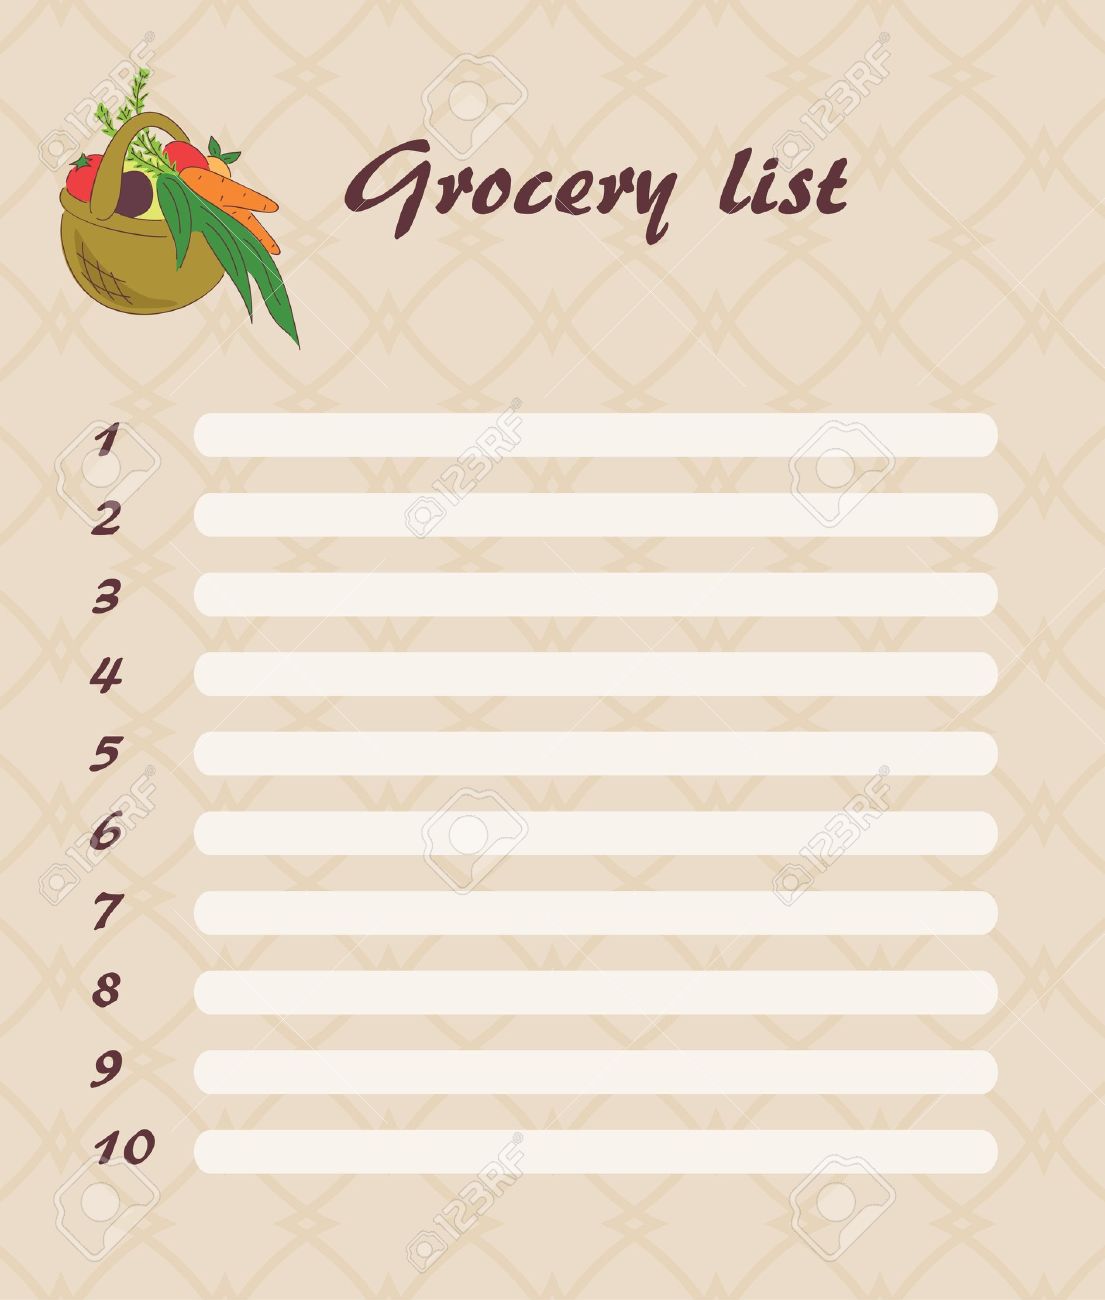 checklist clipart grocery